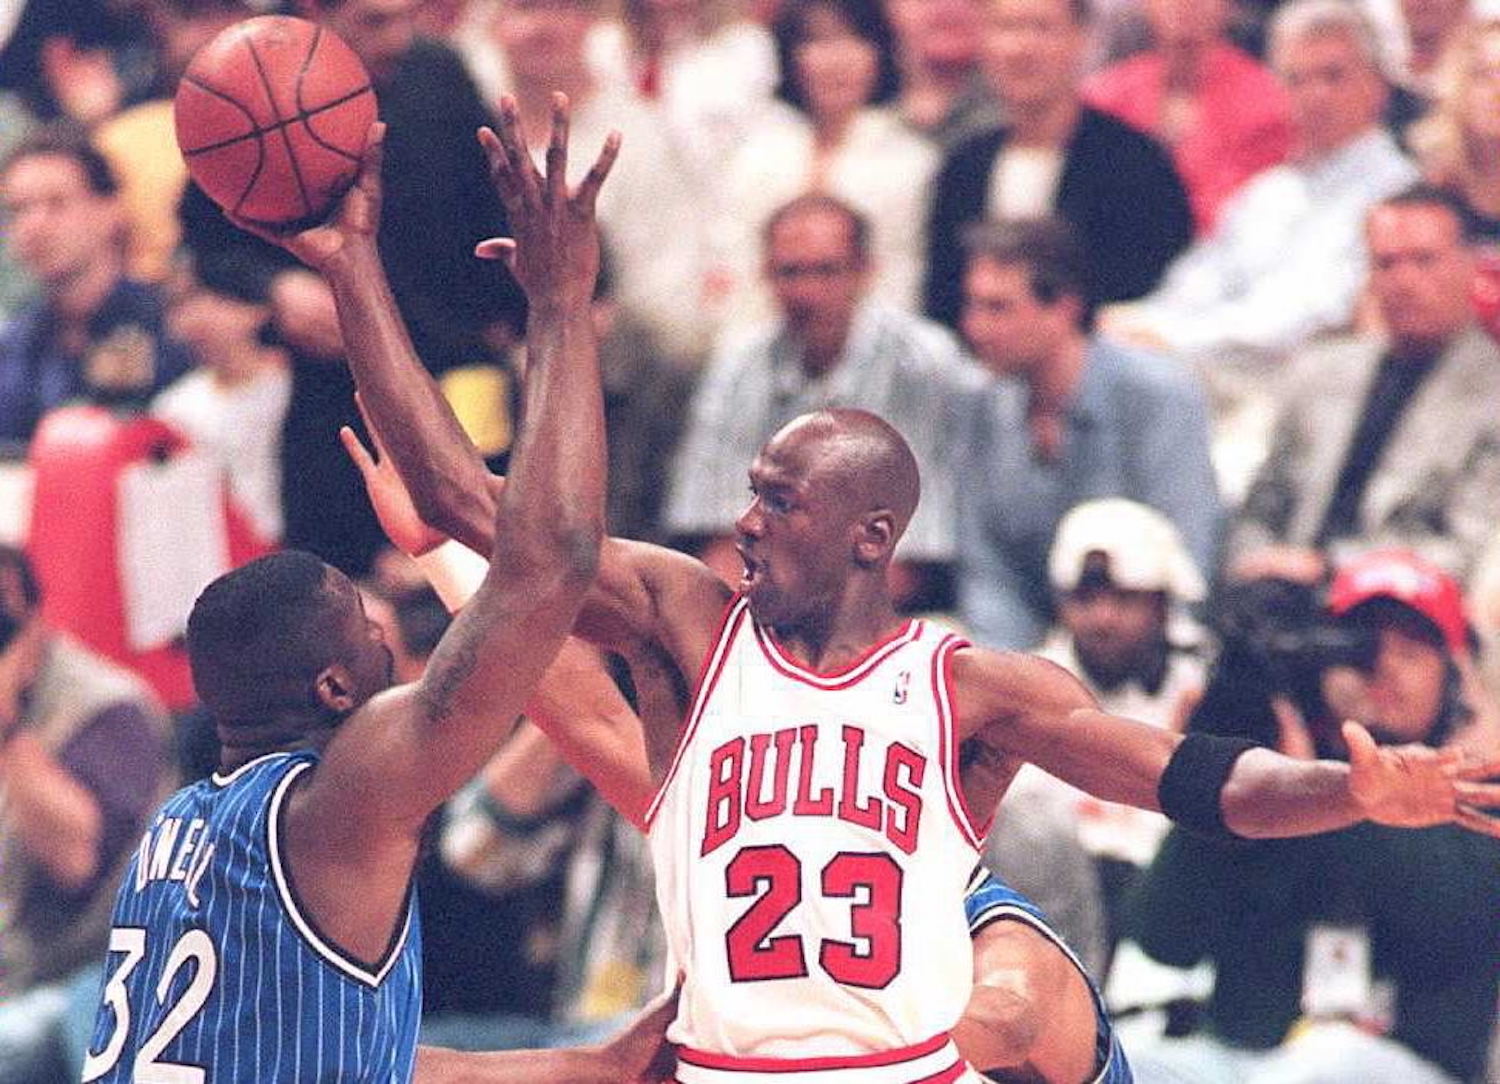 Michael Jordan and Shaquille O'Neal meet in NBA action in 1995.